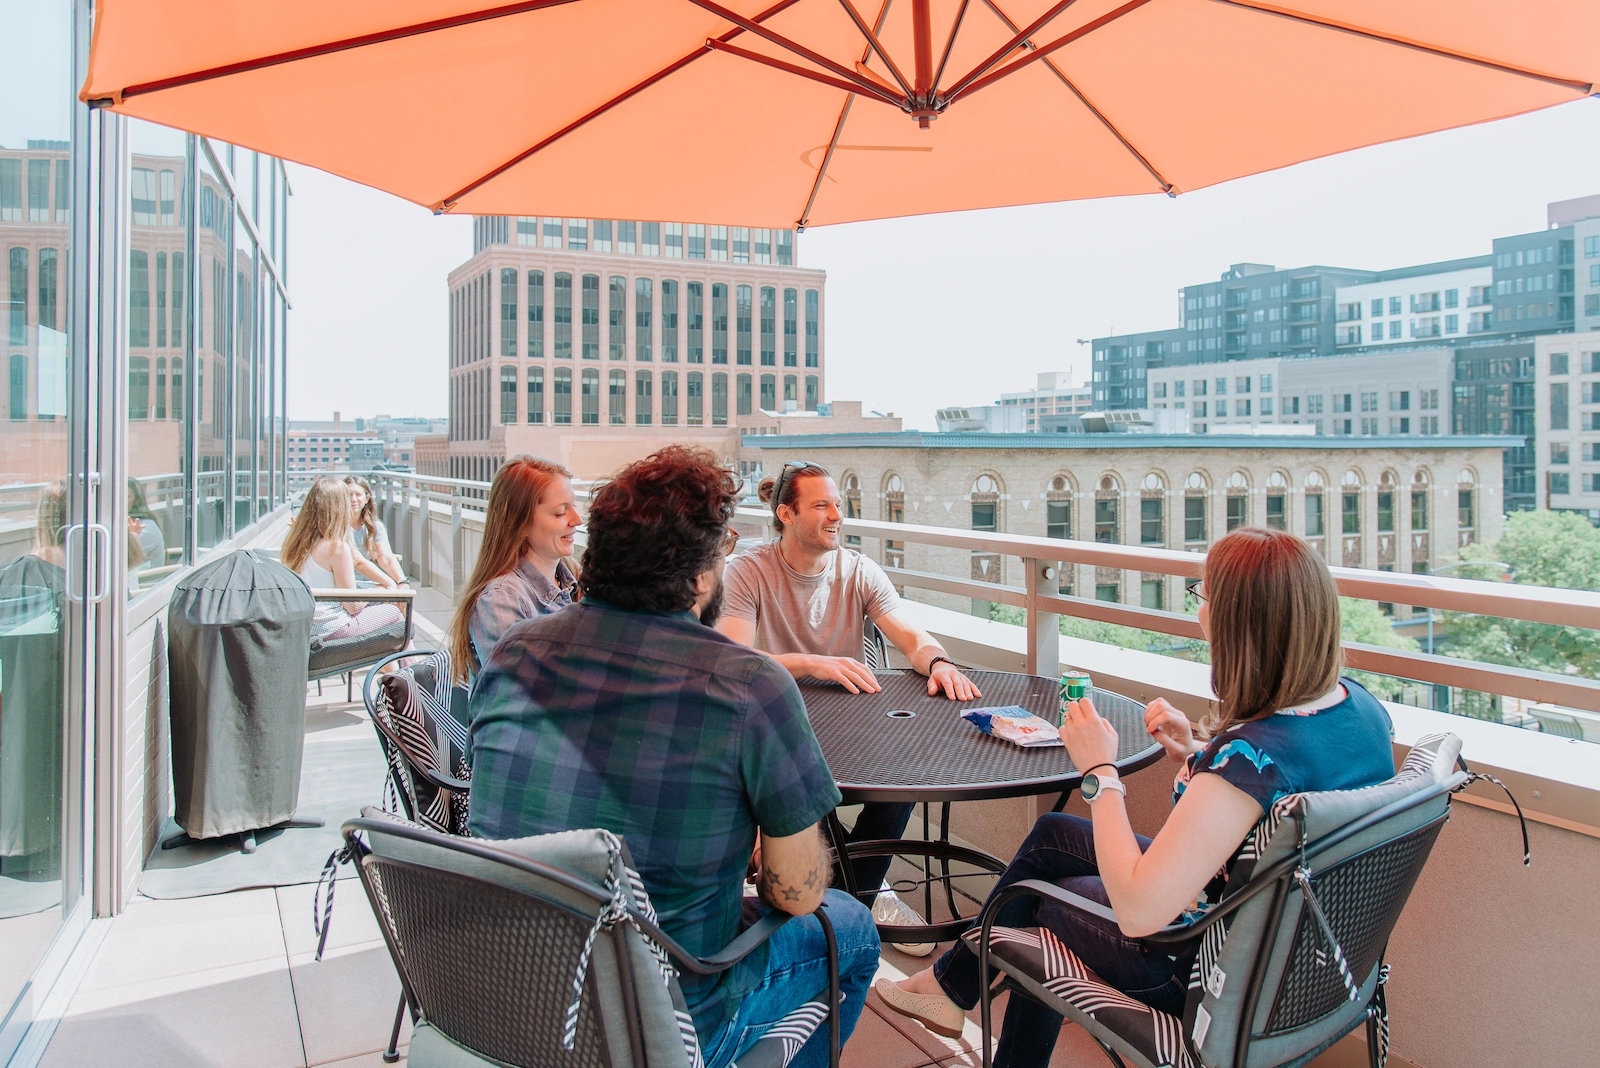 Pie Insurance's Denver office outdoor patio with employees sitting around a table under an orange umbrella. The city skyline is visible in the background.